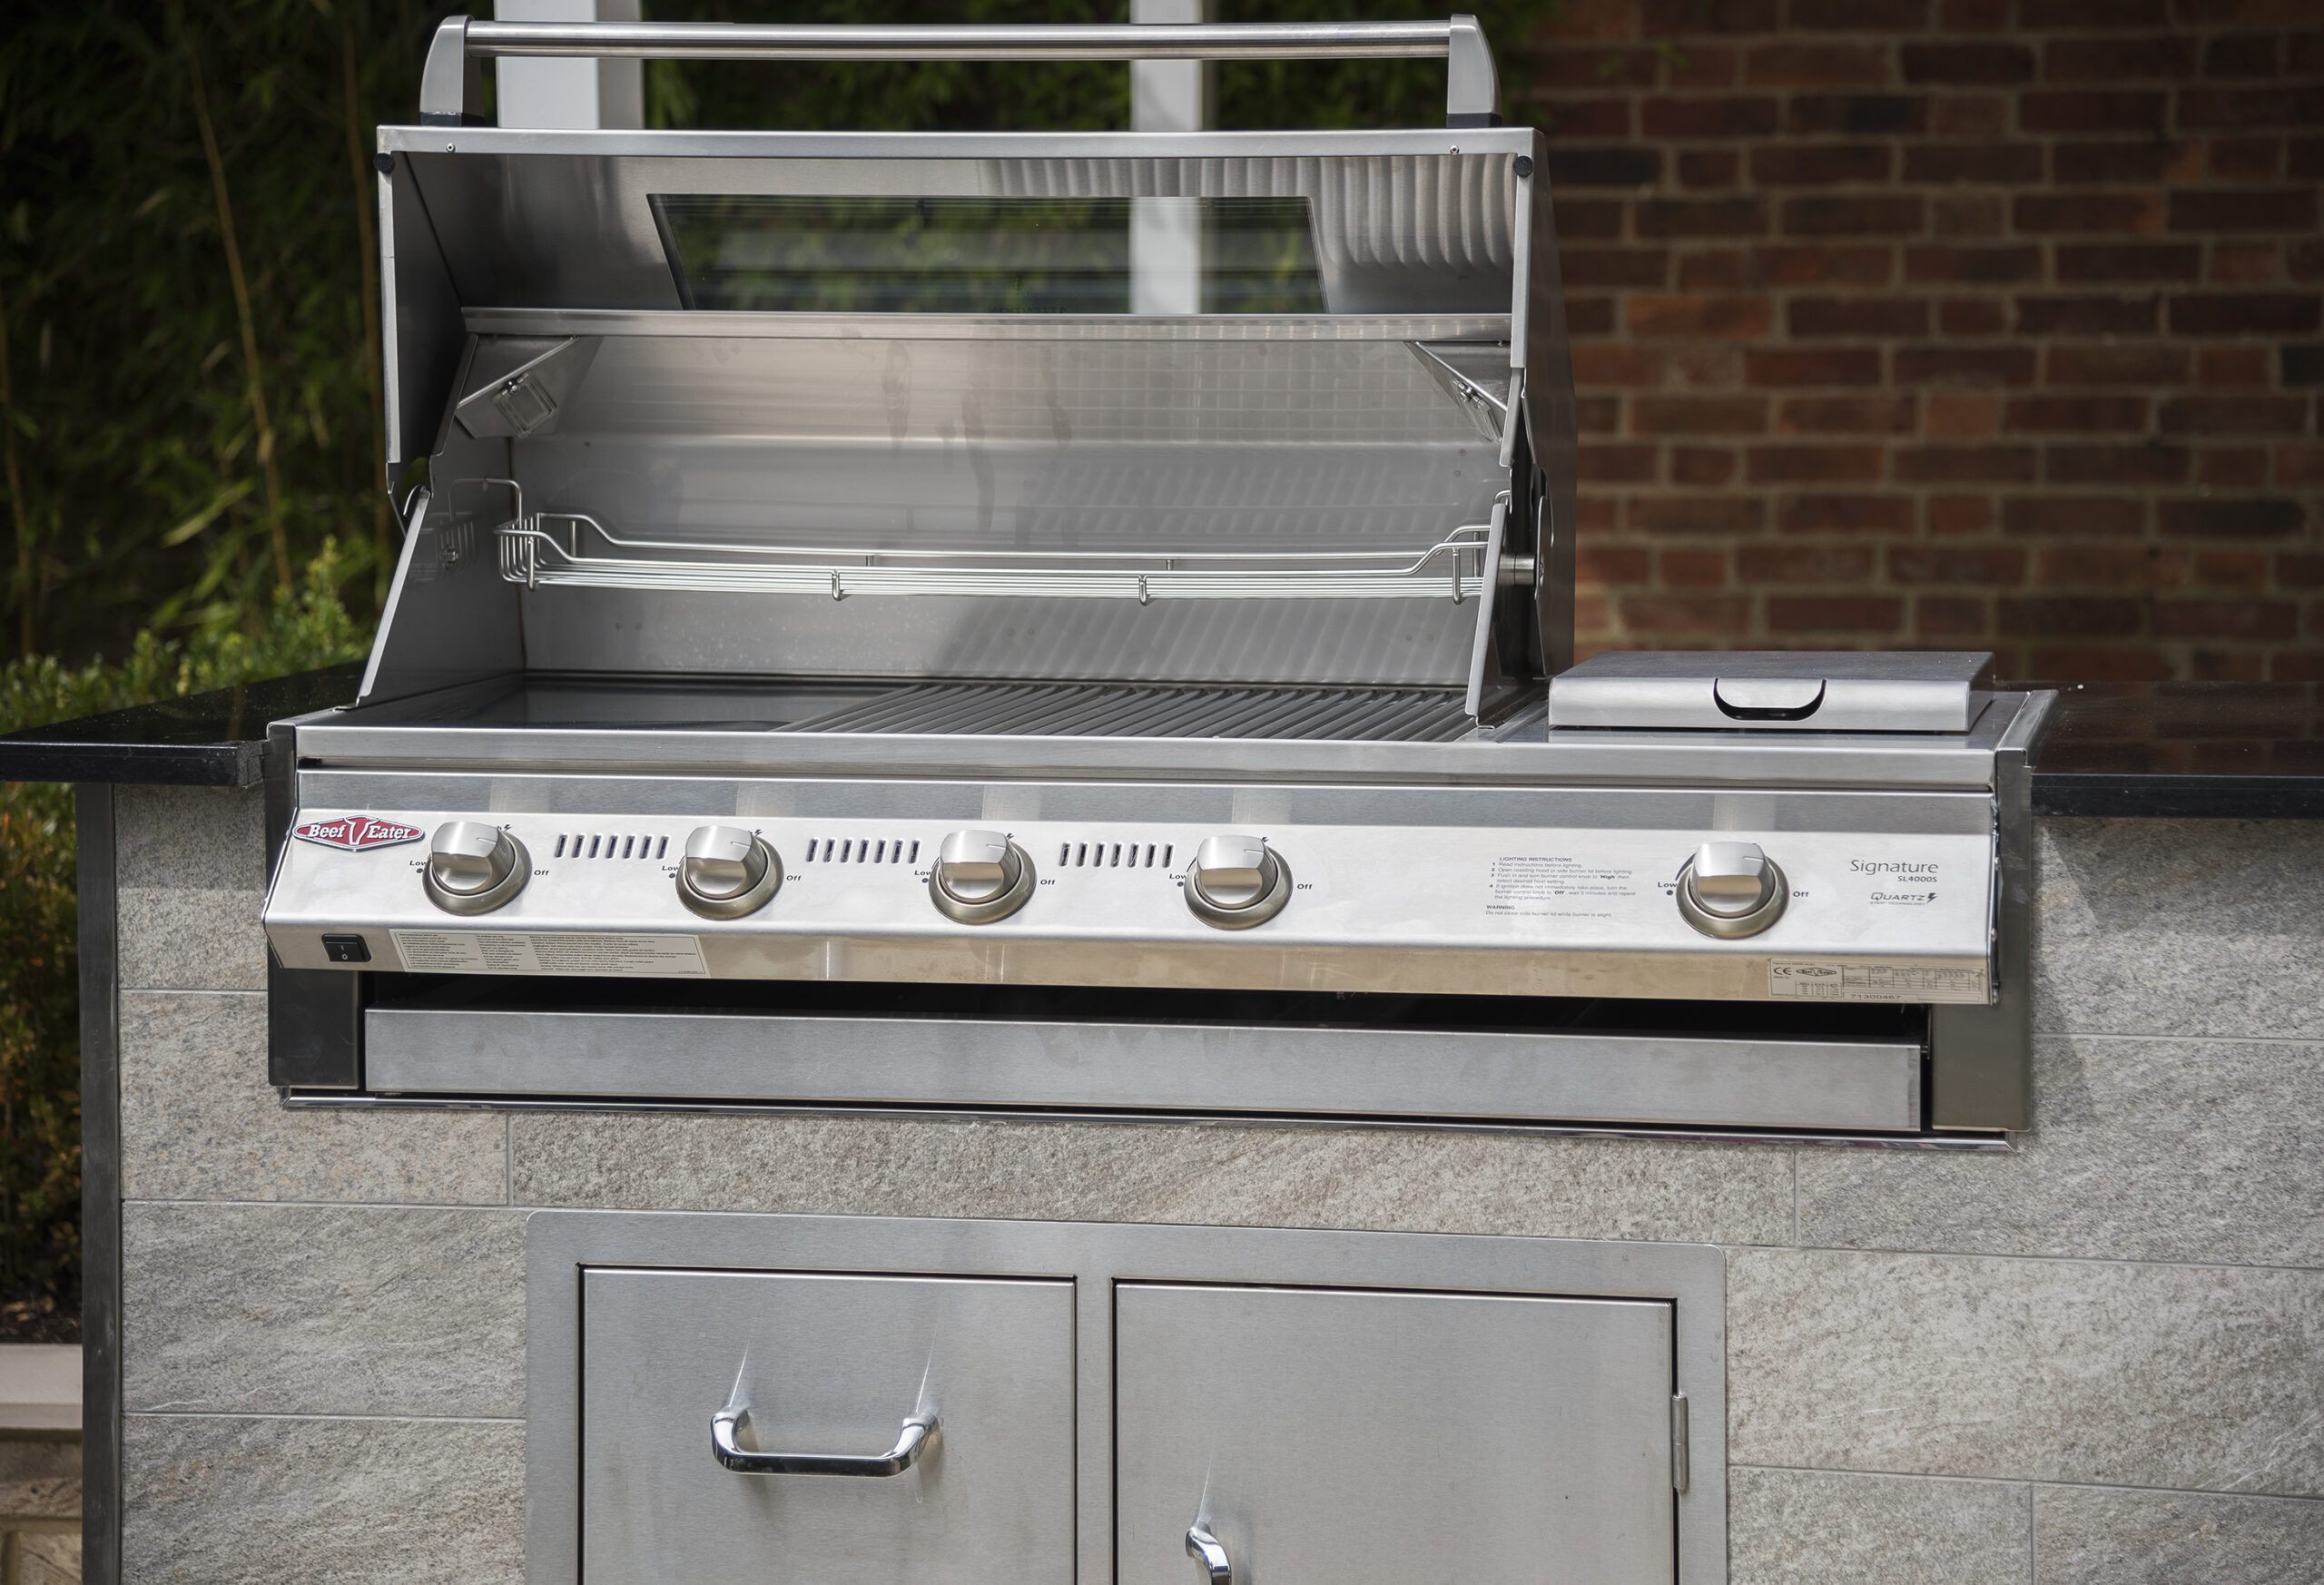 Barbeques, side-burners and rotisseries for your outdoor kitchen